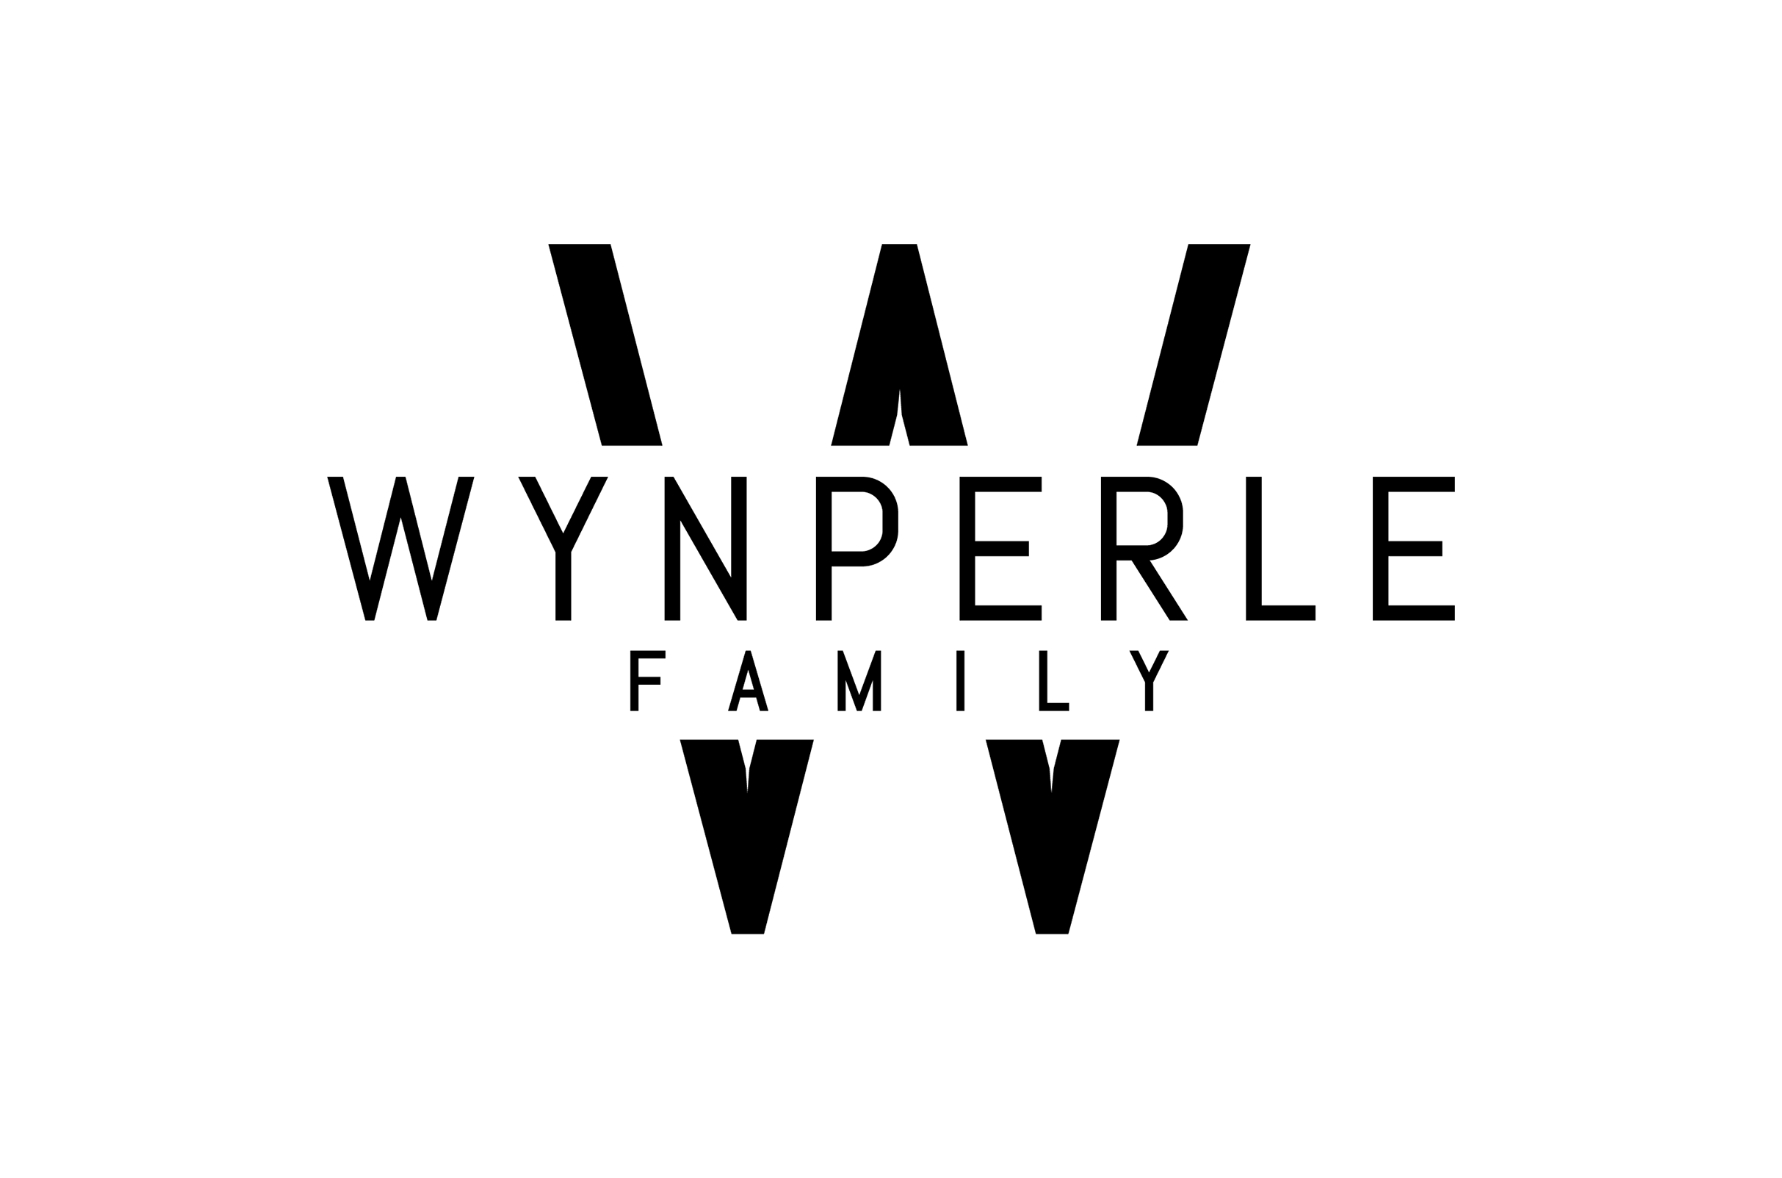 The Wynperle Family